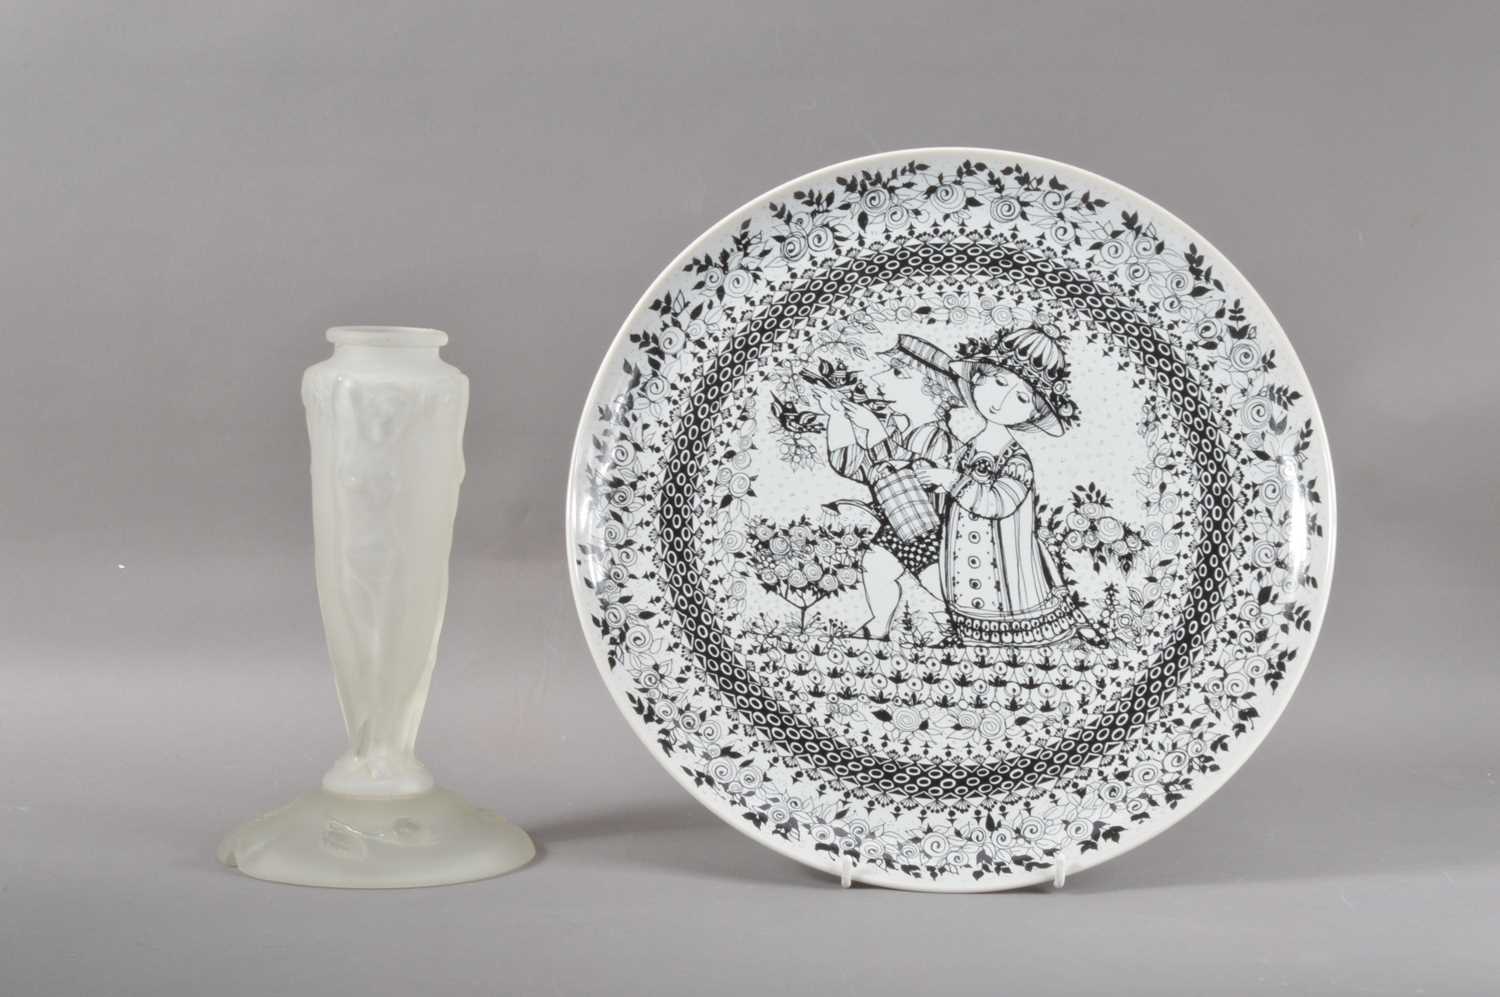 Lot 93 - A good Rosenthal porcelain charger The Seasons Series designed by Bjorn Wiinblad